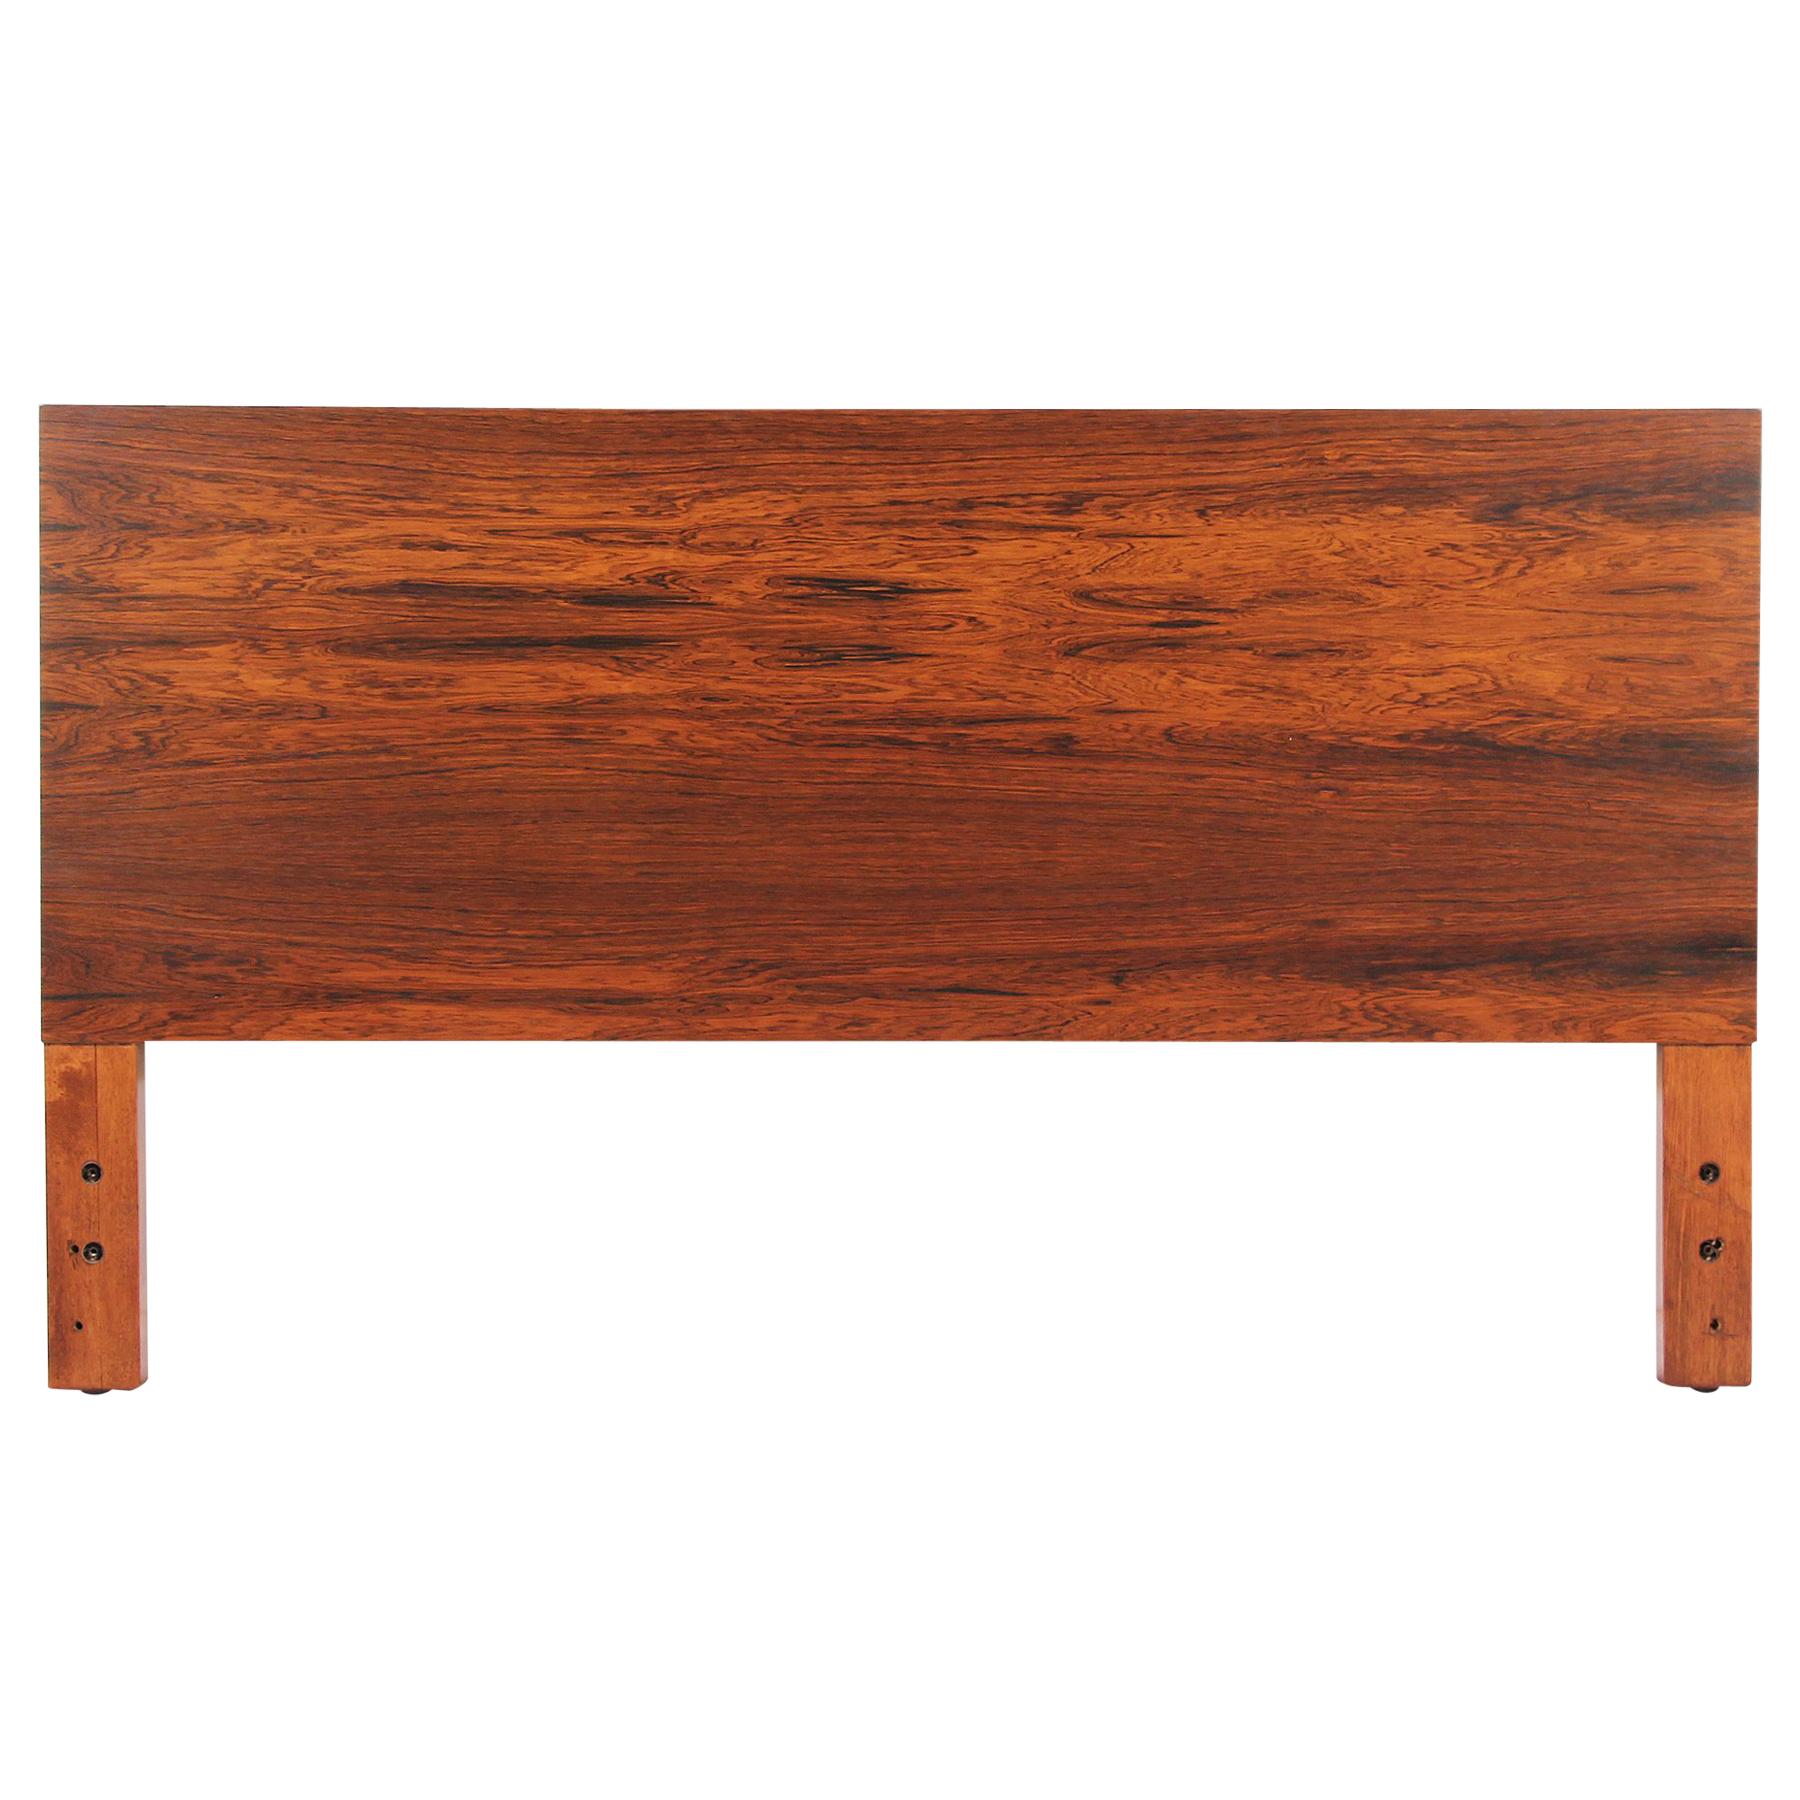 George Nelson 'Thin Edge' Full-Size Rosewood Headboard for Herman Miller